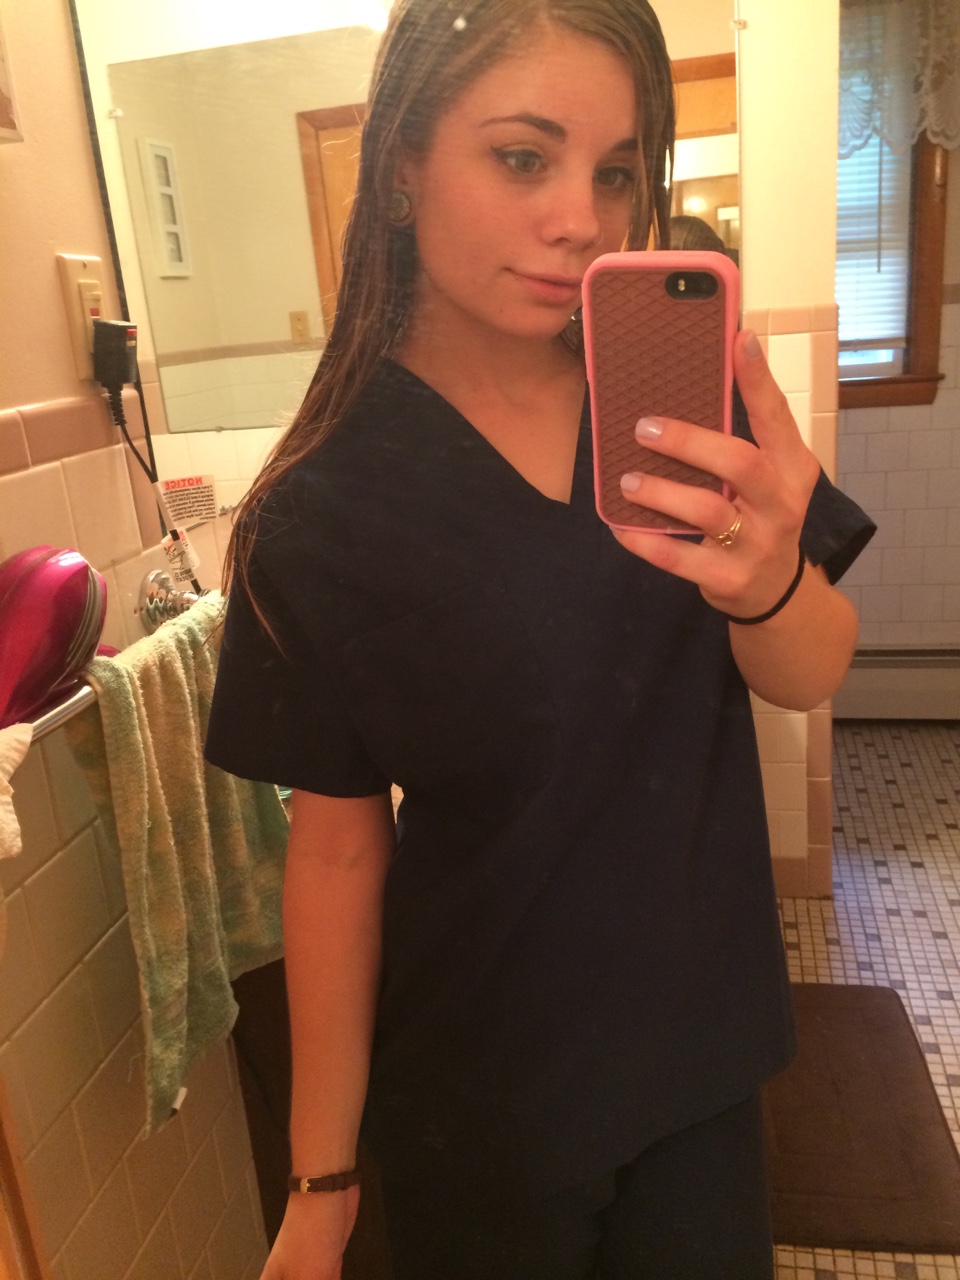 The Cute Dental Assistant